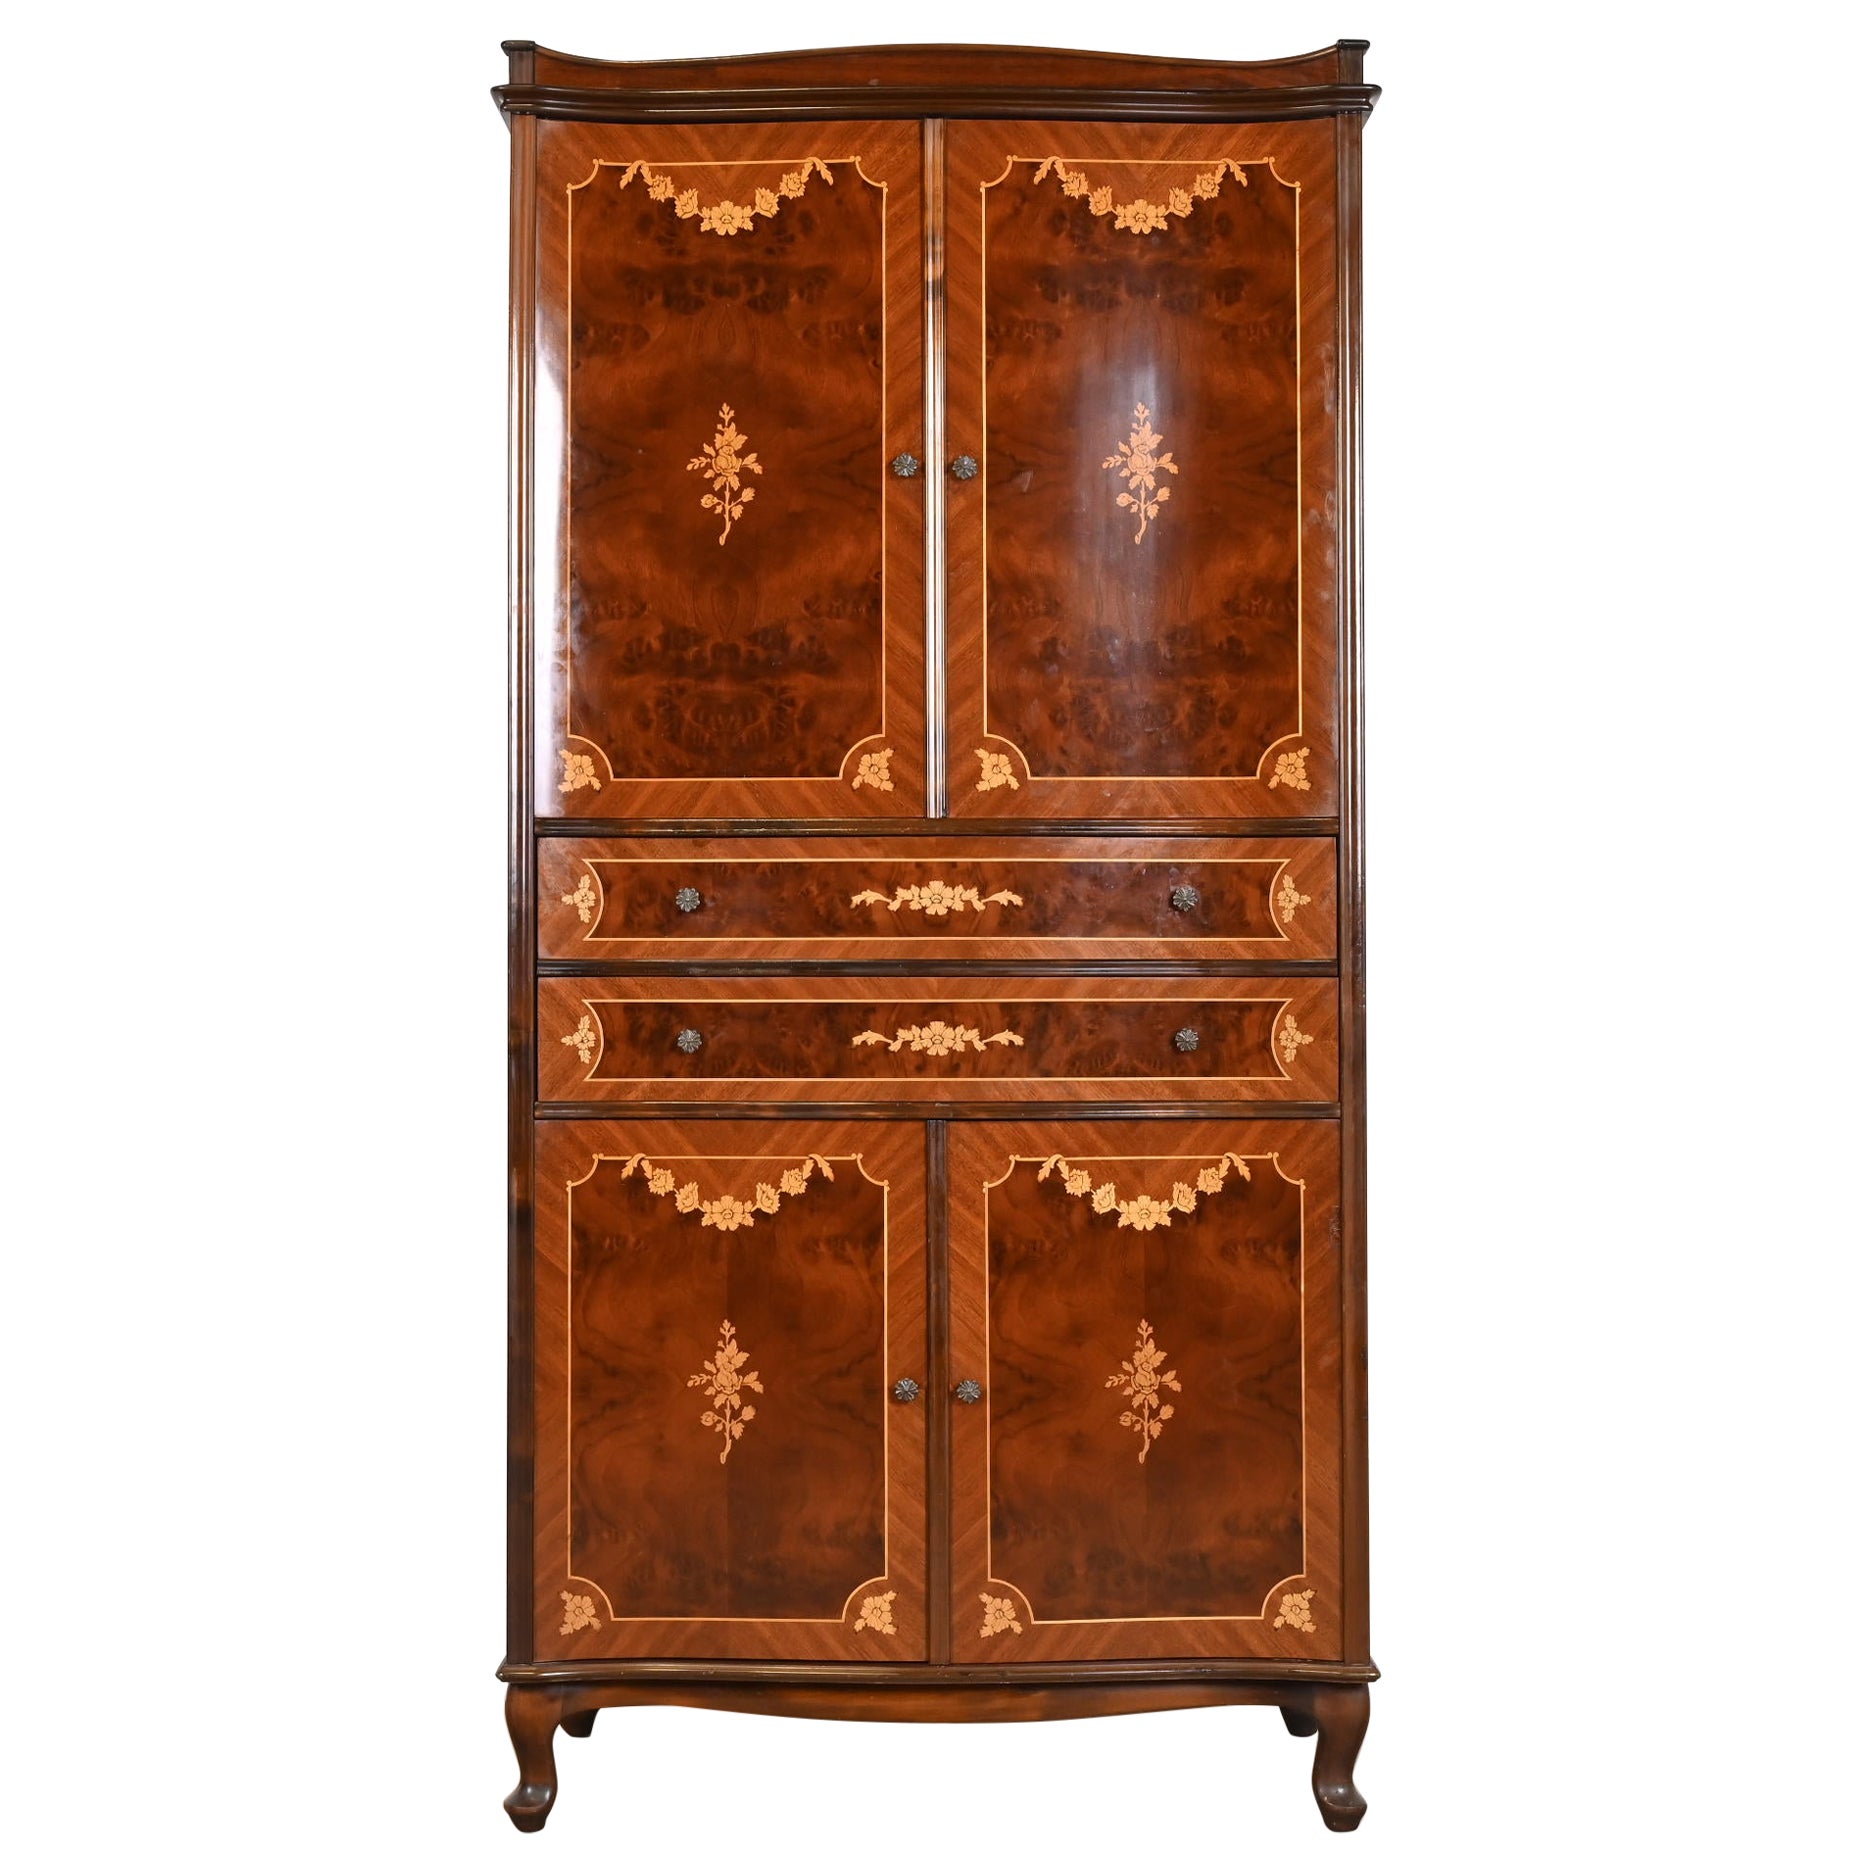 Jules Leleu Style French Continental Inlaid Burled Mahogany Armoire Dresser